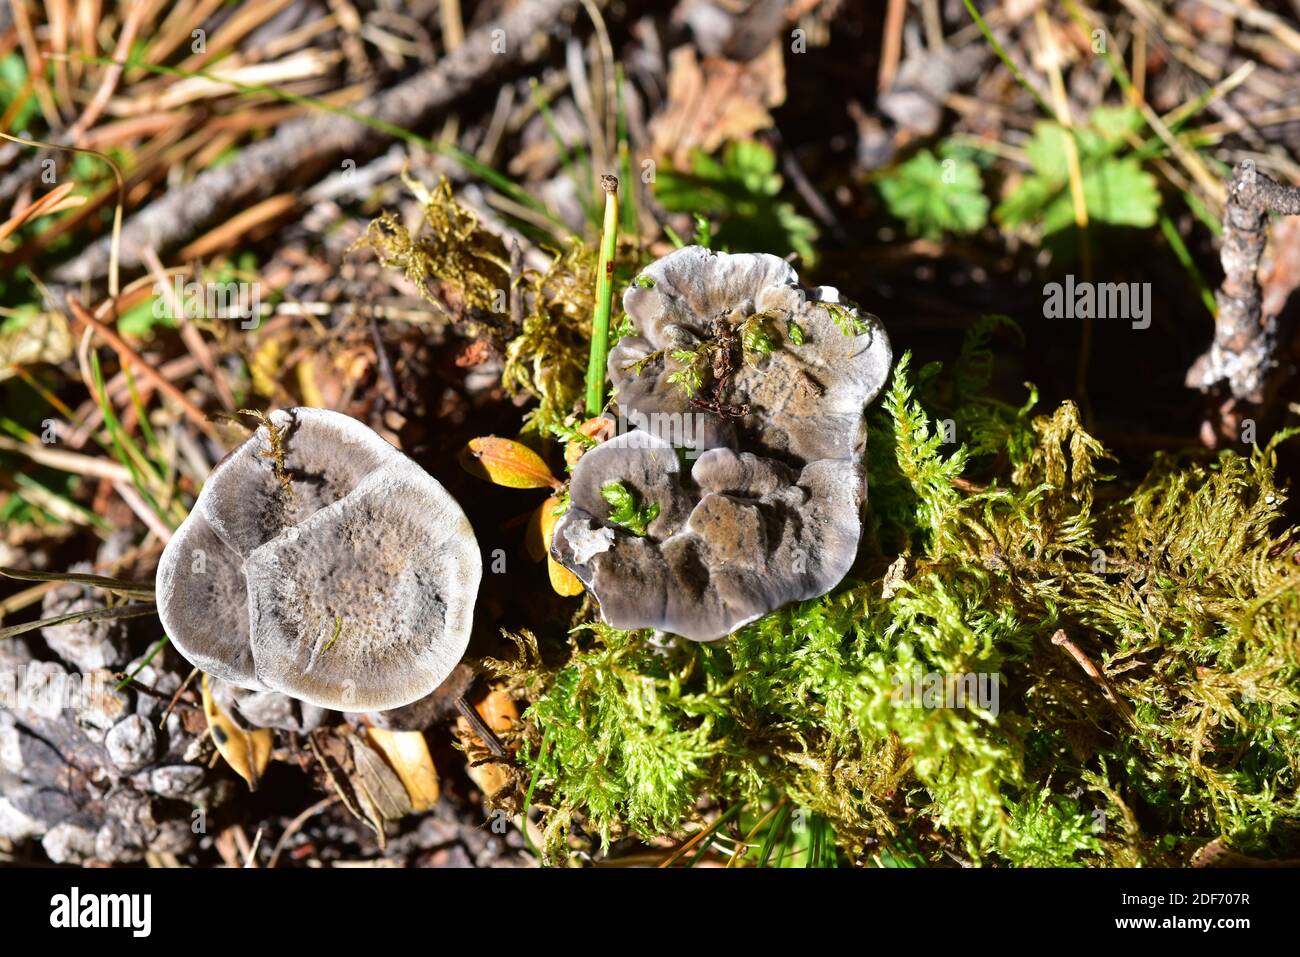 Black tooth (Phellodon niger) is an inedible fungus that grows on soil forests. This photo was taken near Cantavieja, Teruel province, Aragon, Spain. Stock Photo